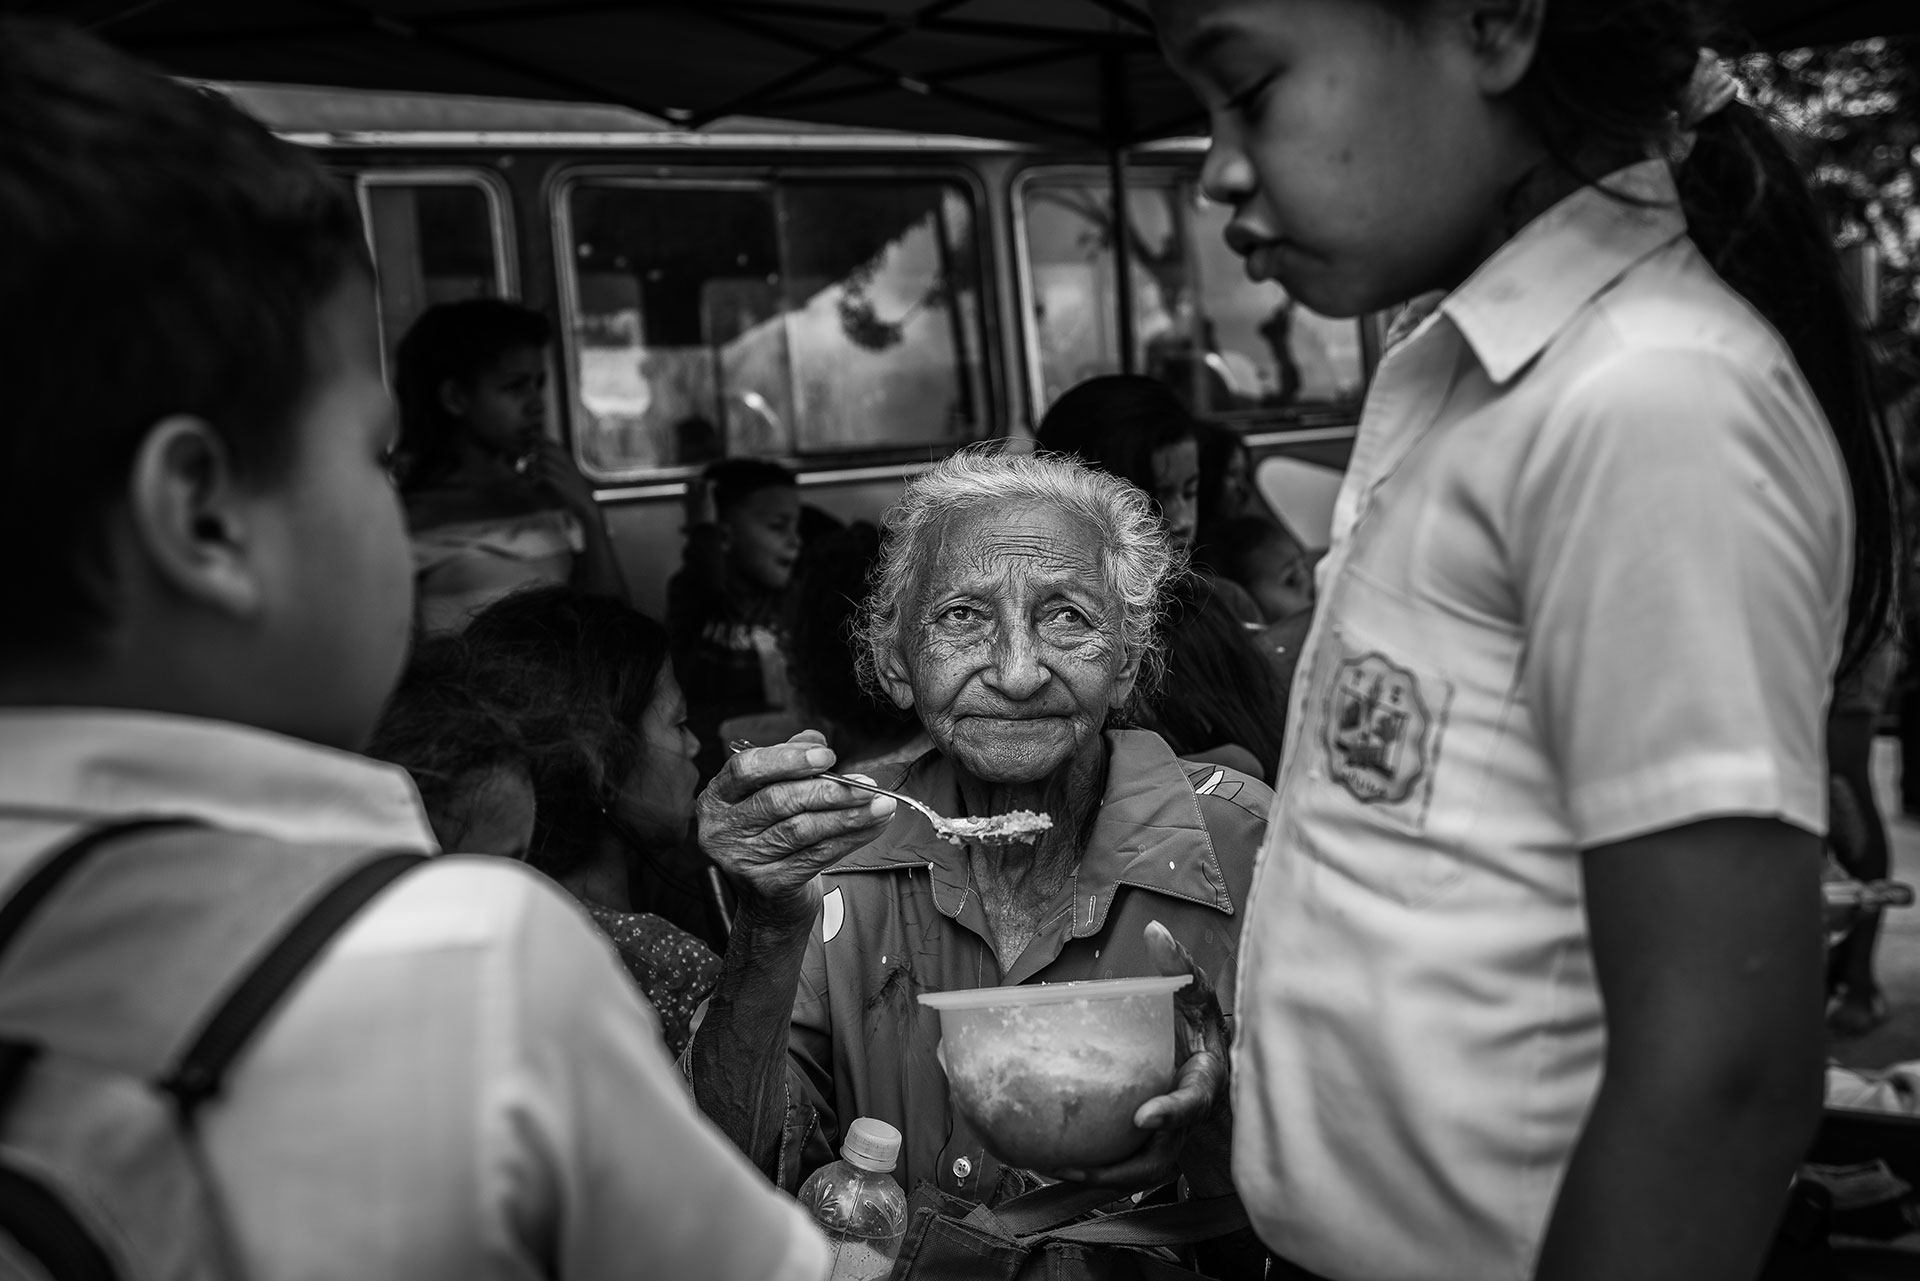 An elderly lady gives food to a child in a social canteen organized by a local NGO. According to Caritas, 65% of the youth they work with suffers from malnutrition.